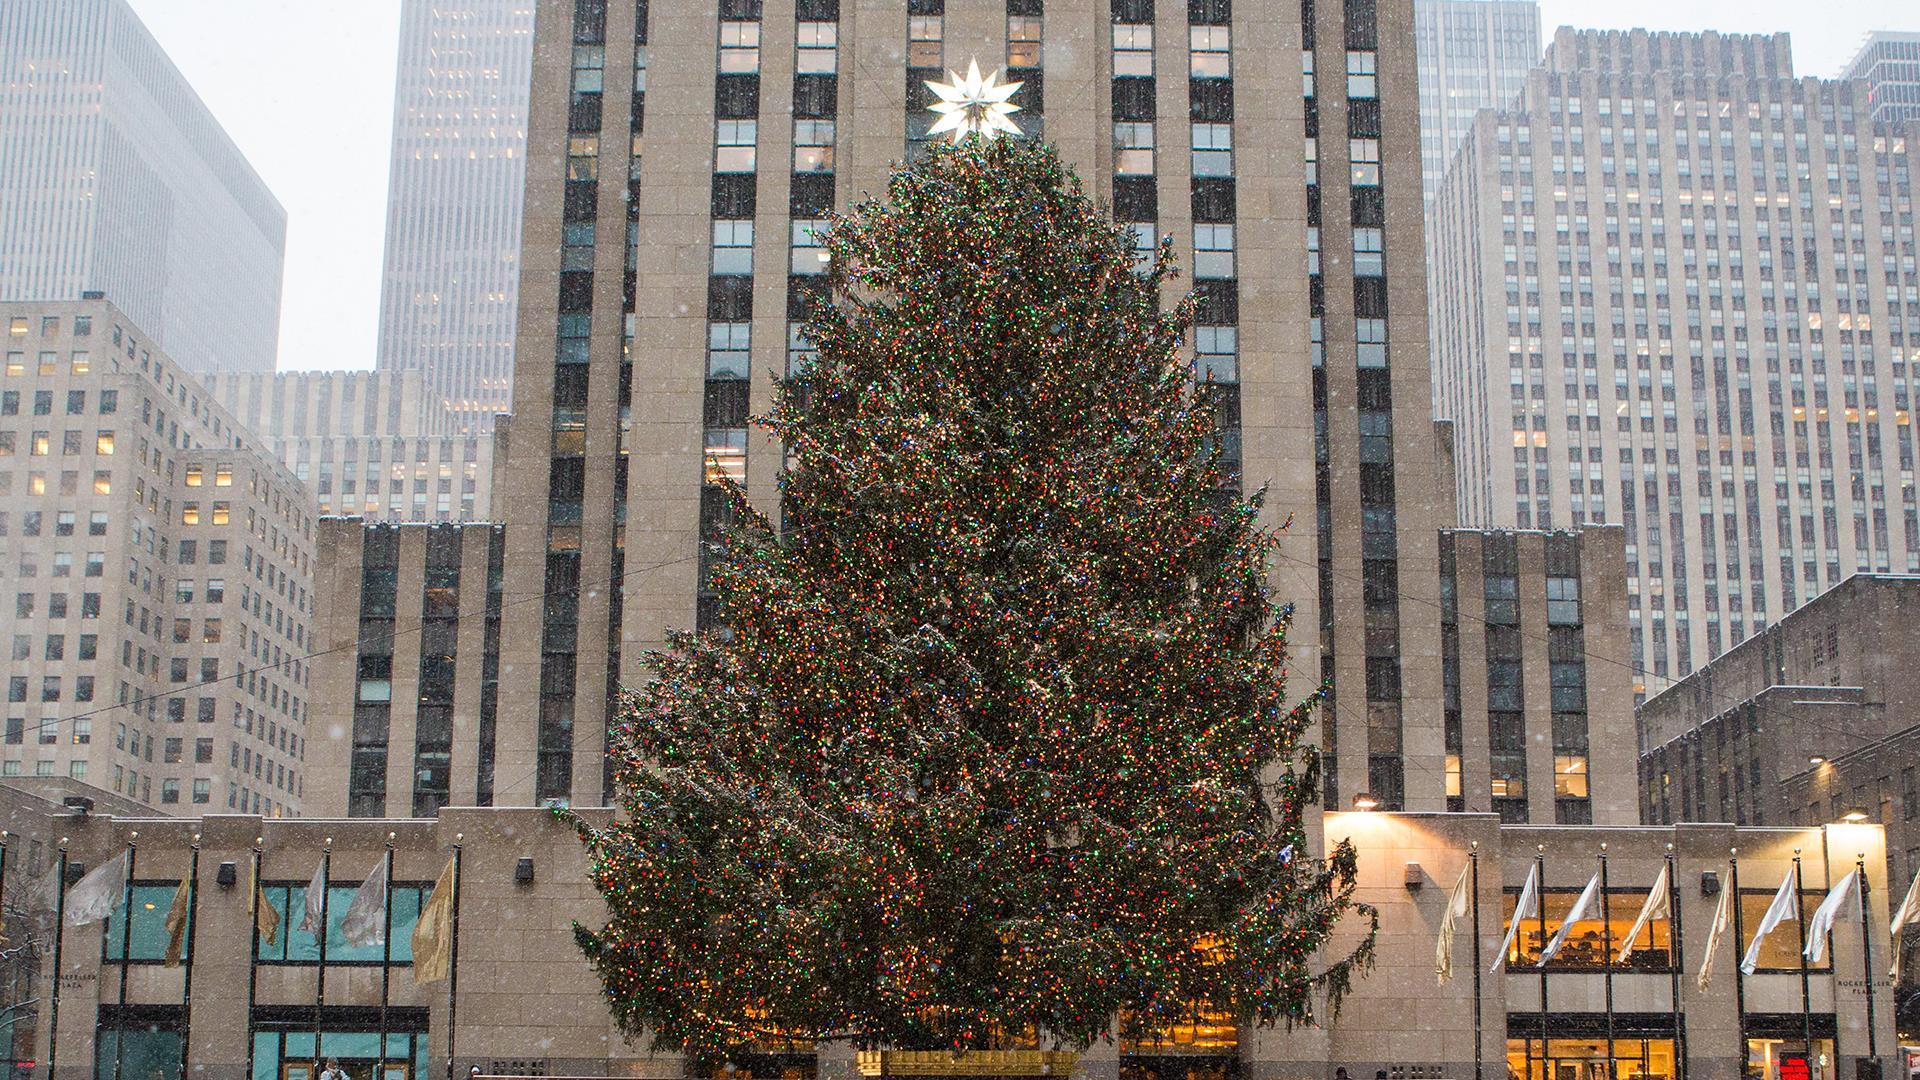 See the story behind this year's Rockefeller Center Christmas tree